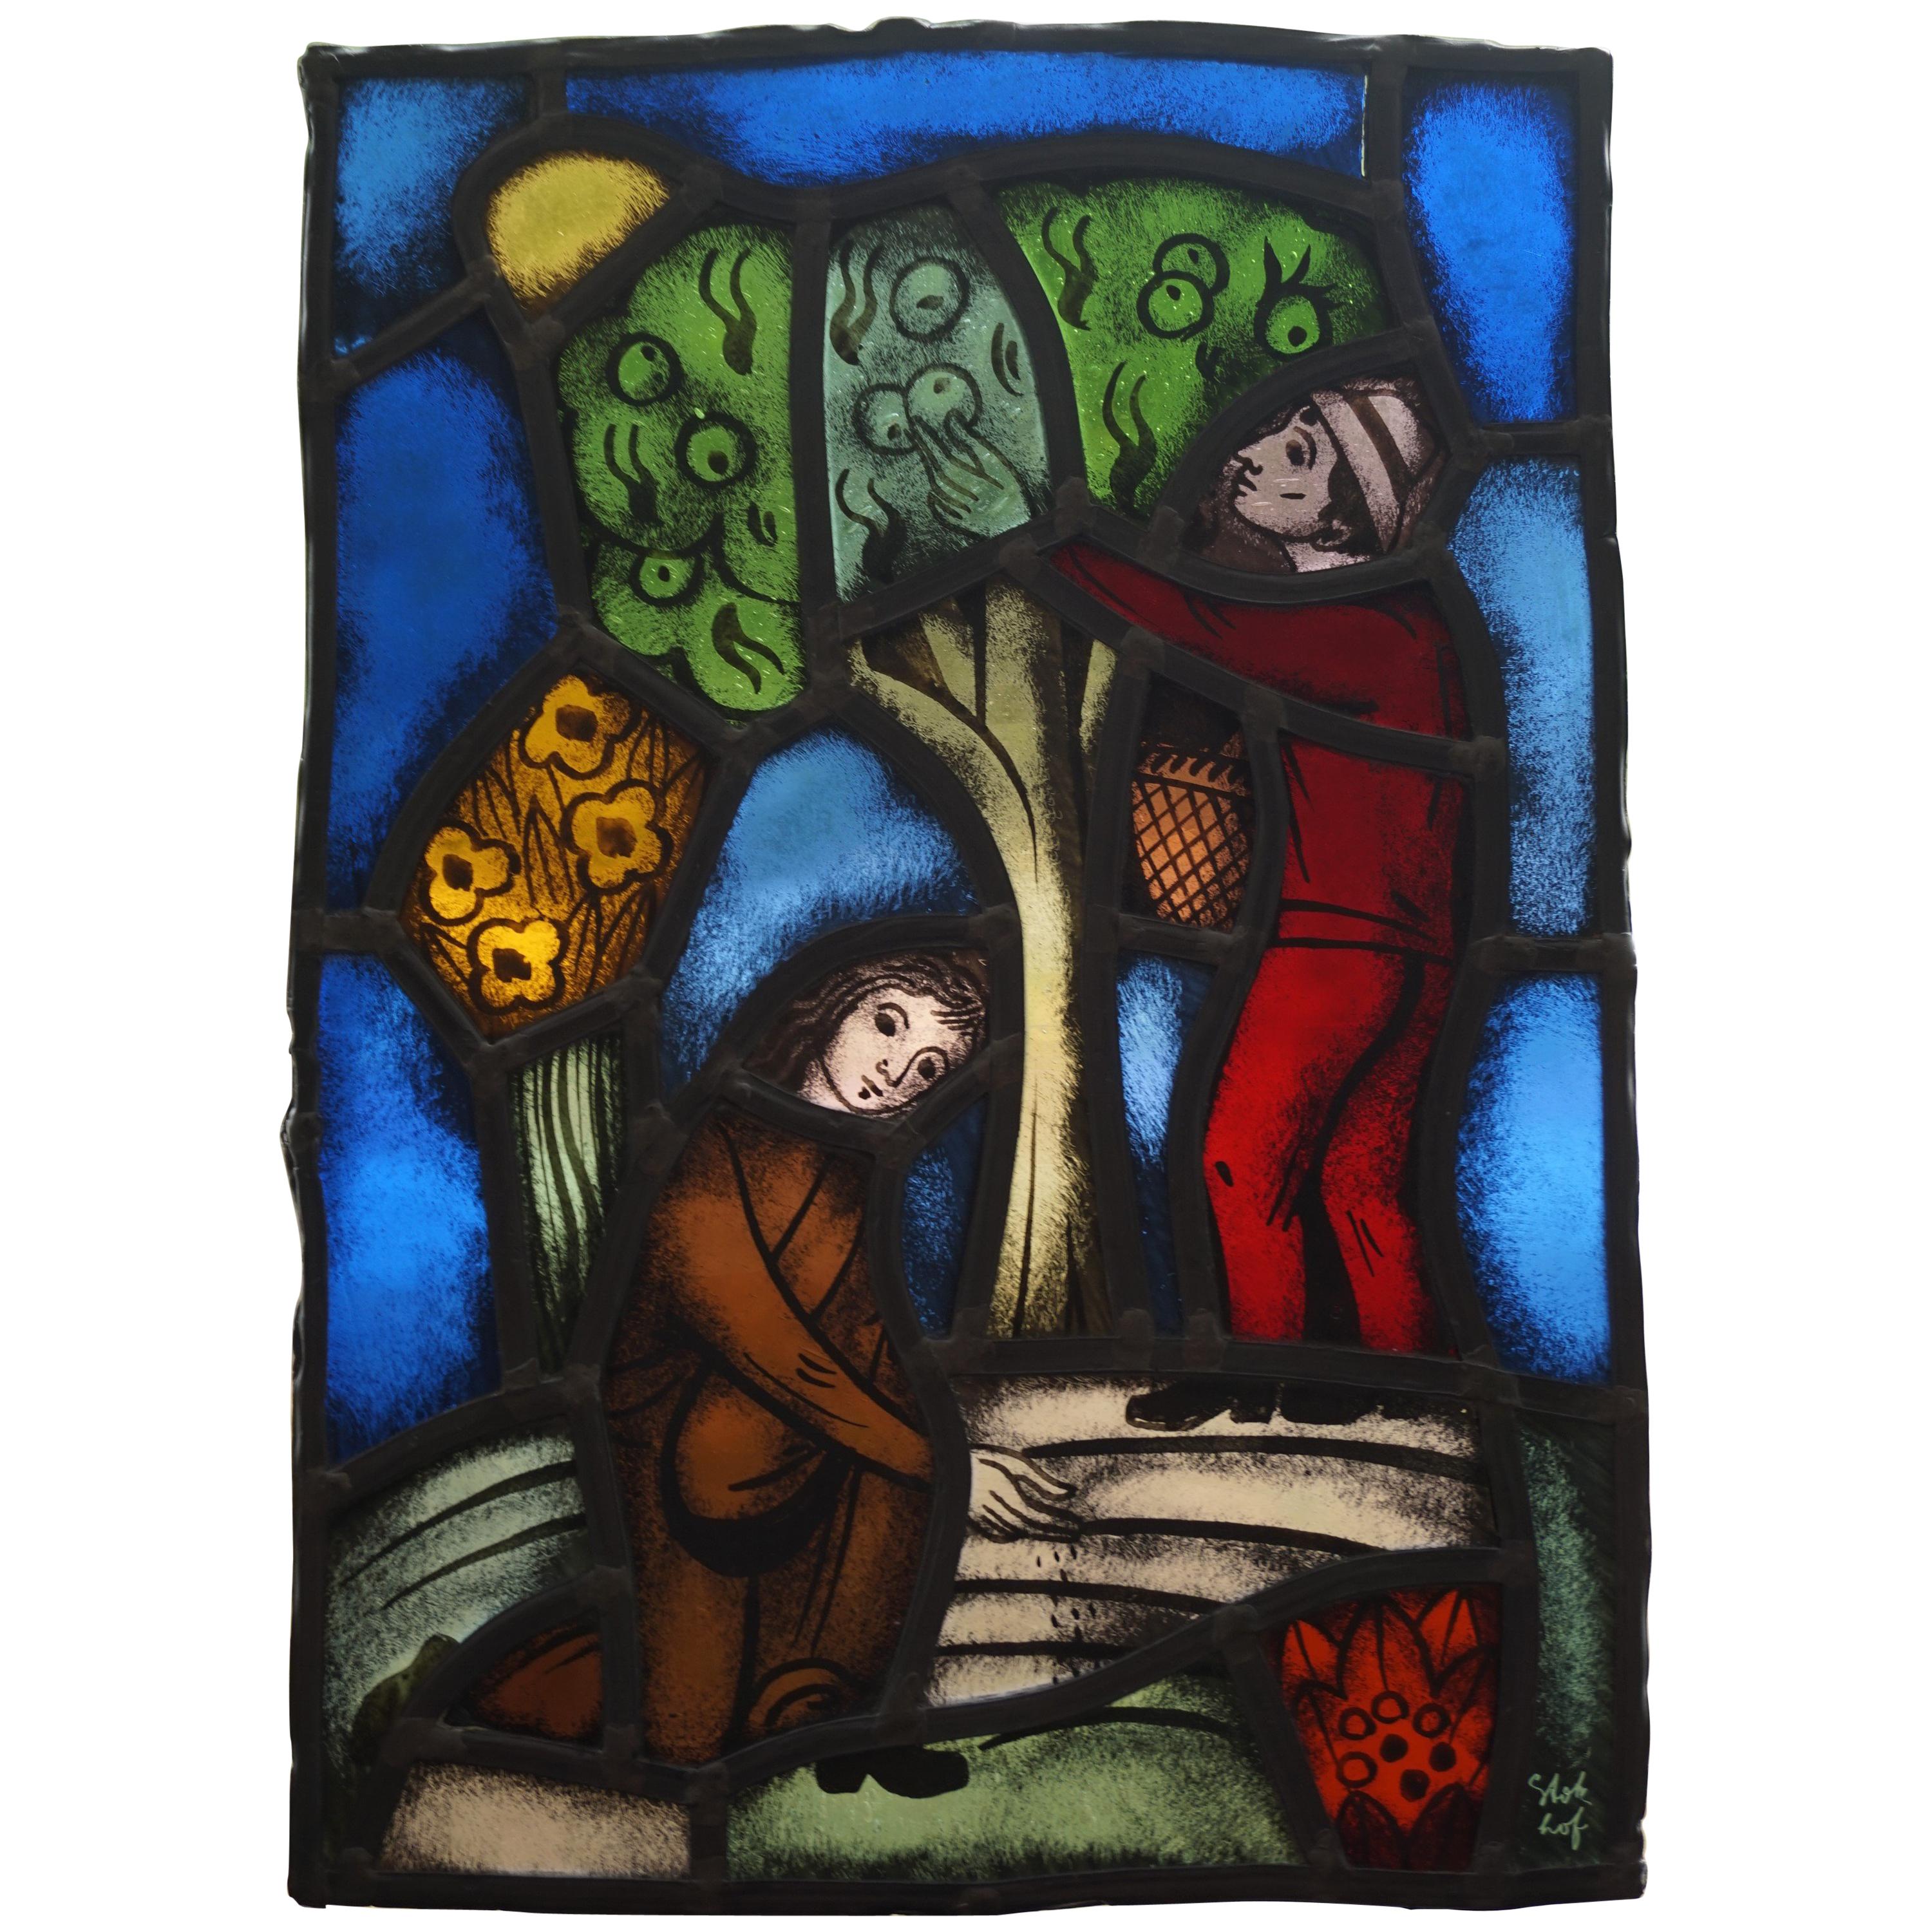 Biblical 'You Reap What You Sow' Leaded & Stained Glass Panel by Abraham Stokhof